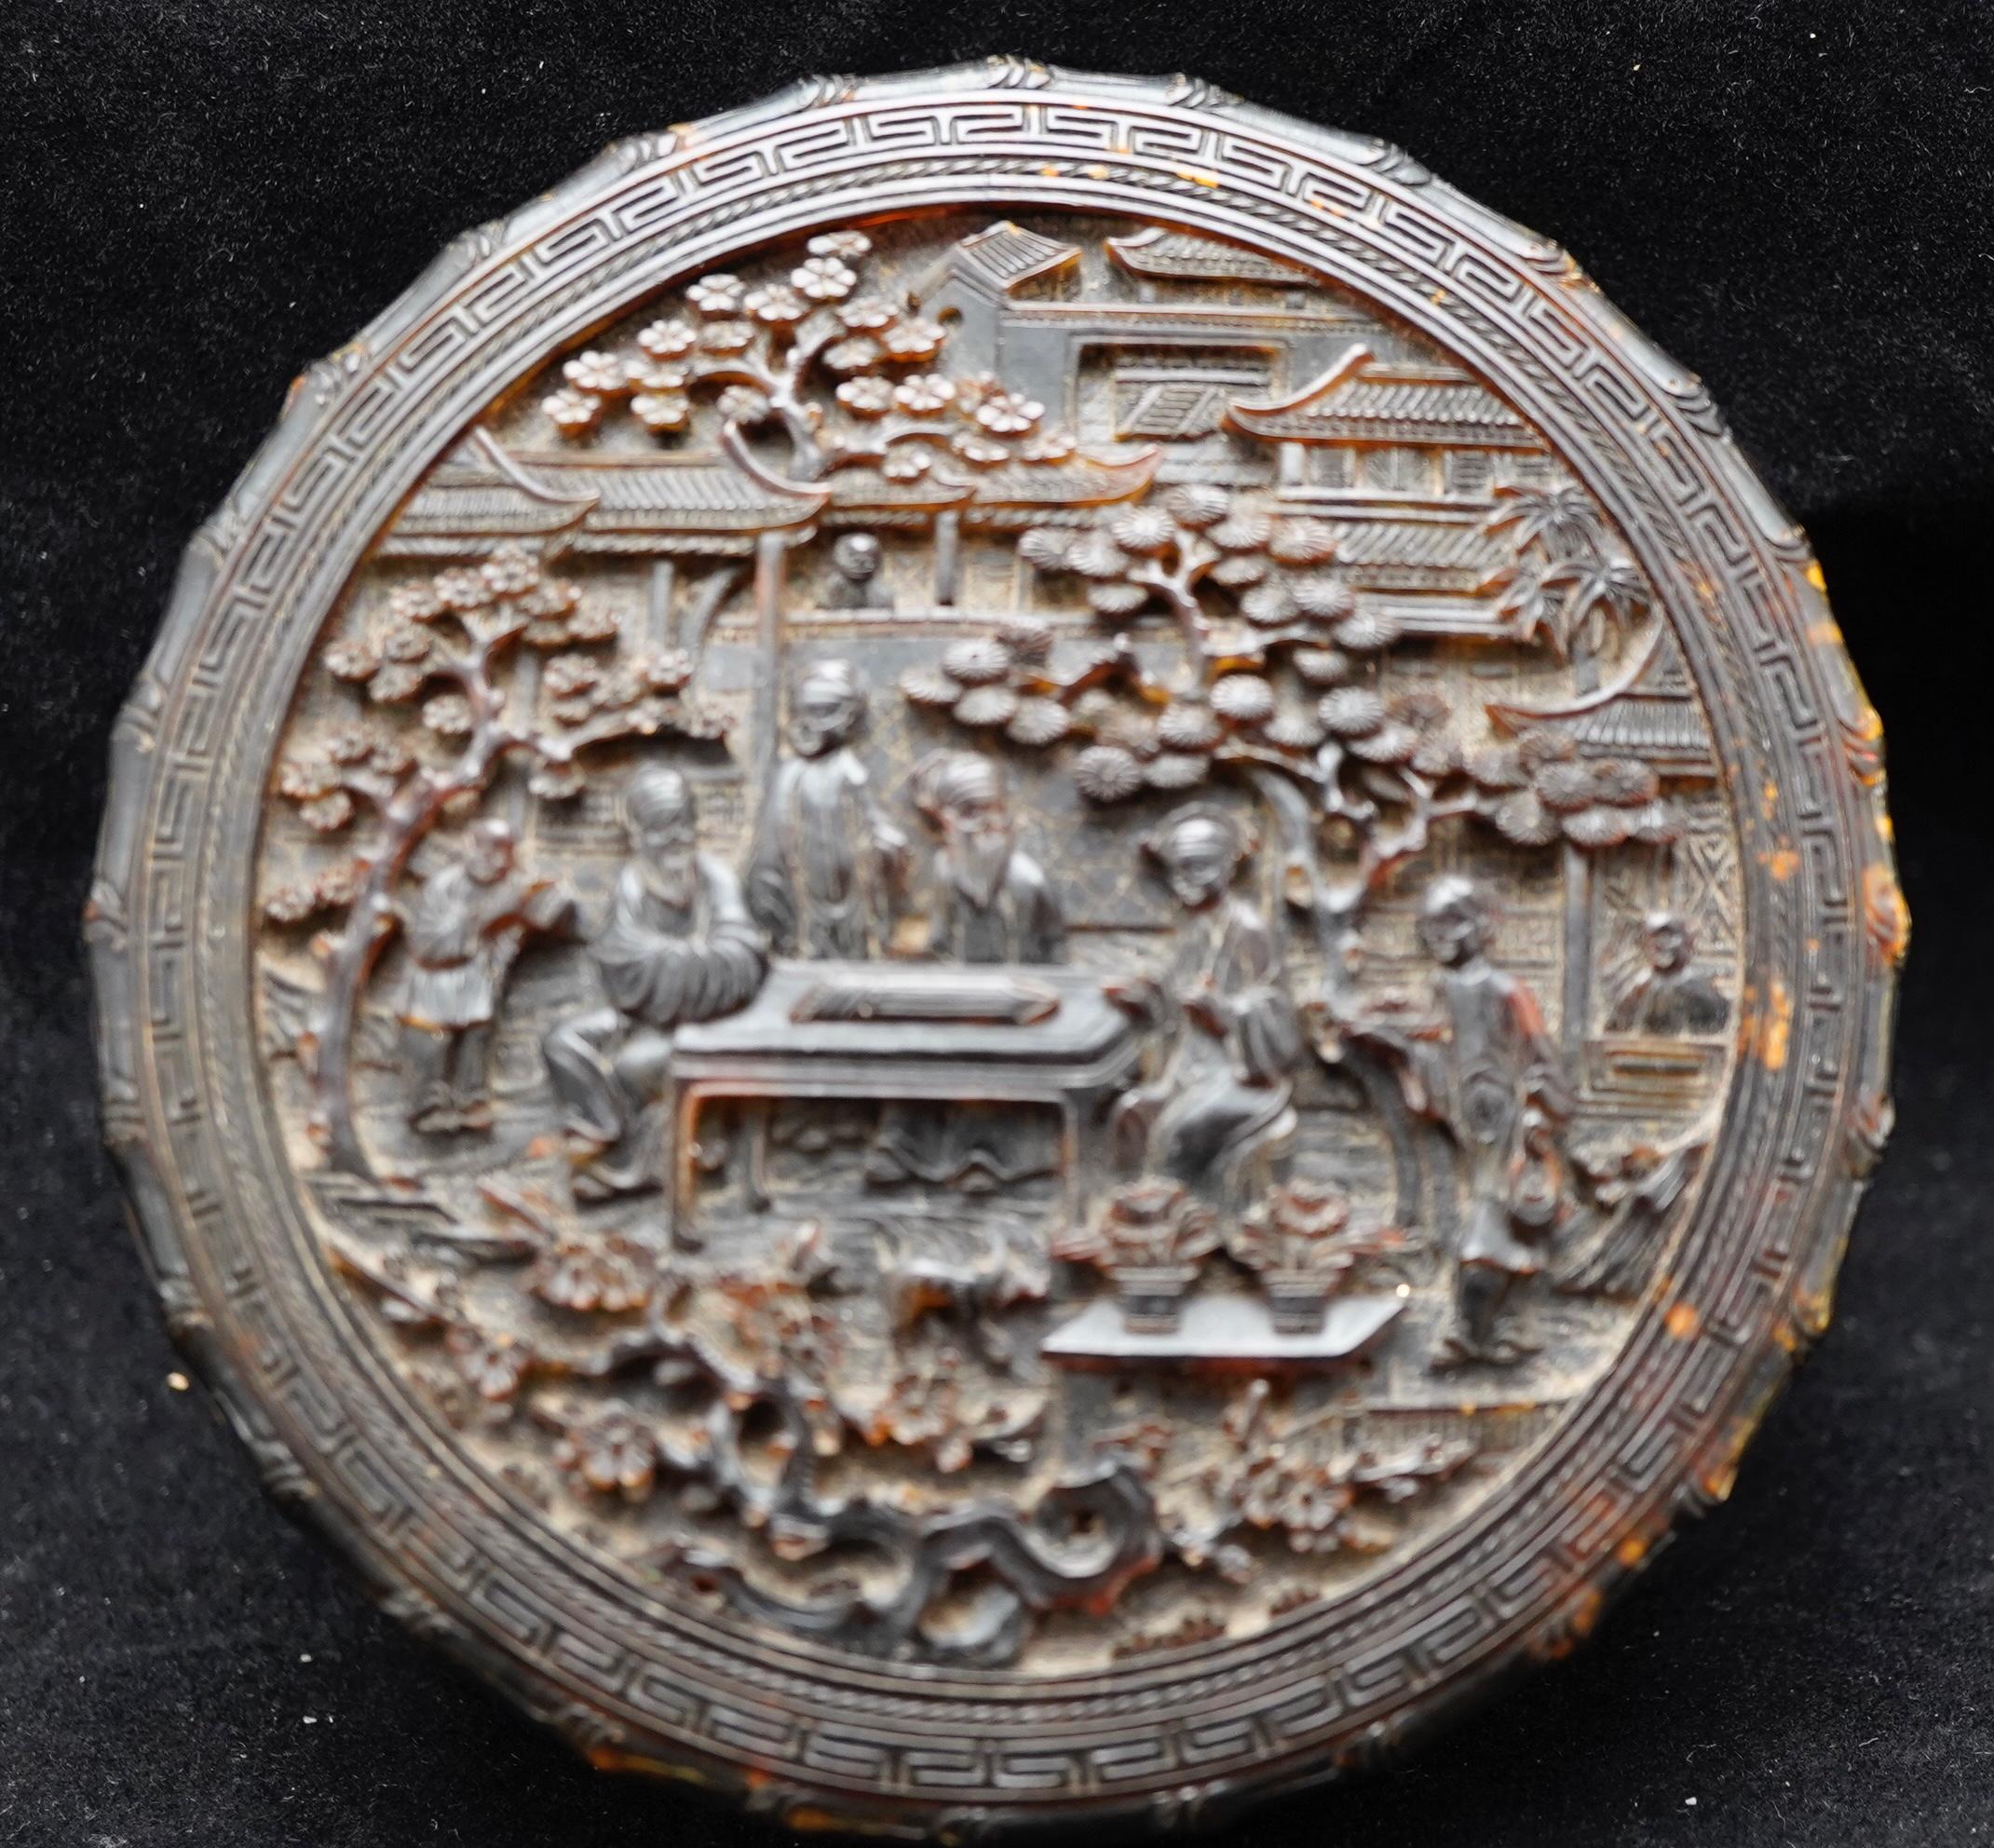 Chinese tortoise shell finely carved box, Canton circ 1840, The box is carved with court scenes on both top and bottom. Finely executed edge with greek key pattern and scenes.
THIS ITEM CAN ONLY BE SHIPPED WITHIN US.